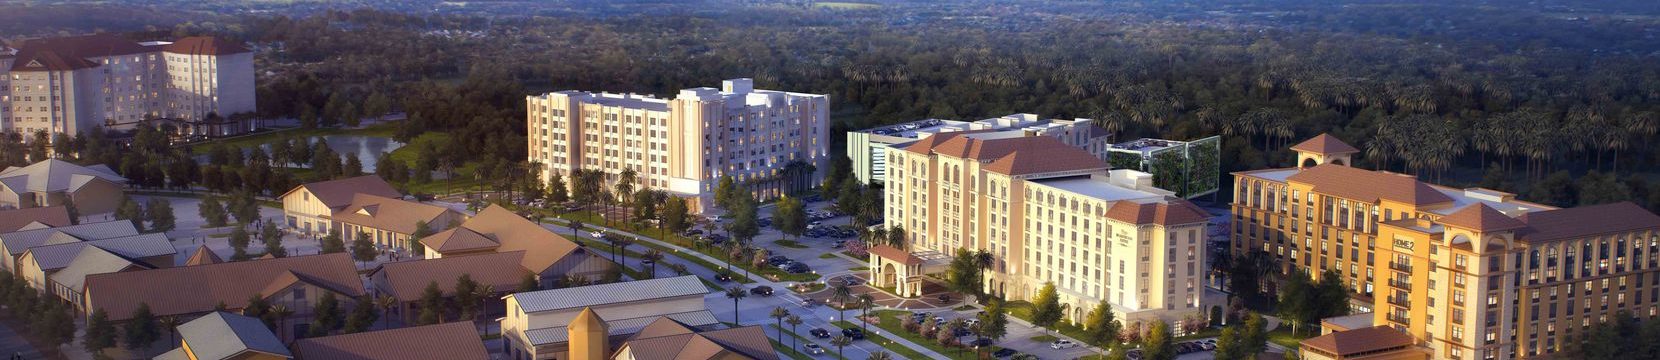 Dallas’ Hall Structured Finance On Disney World With 4 Hotels